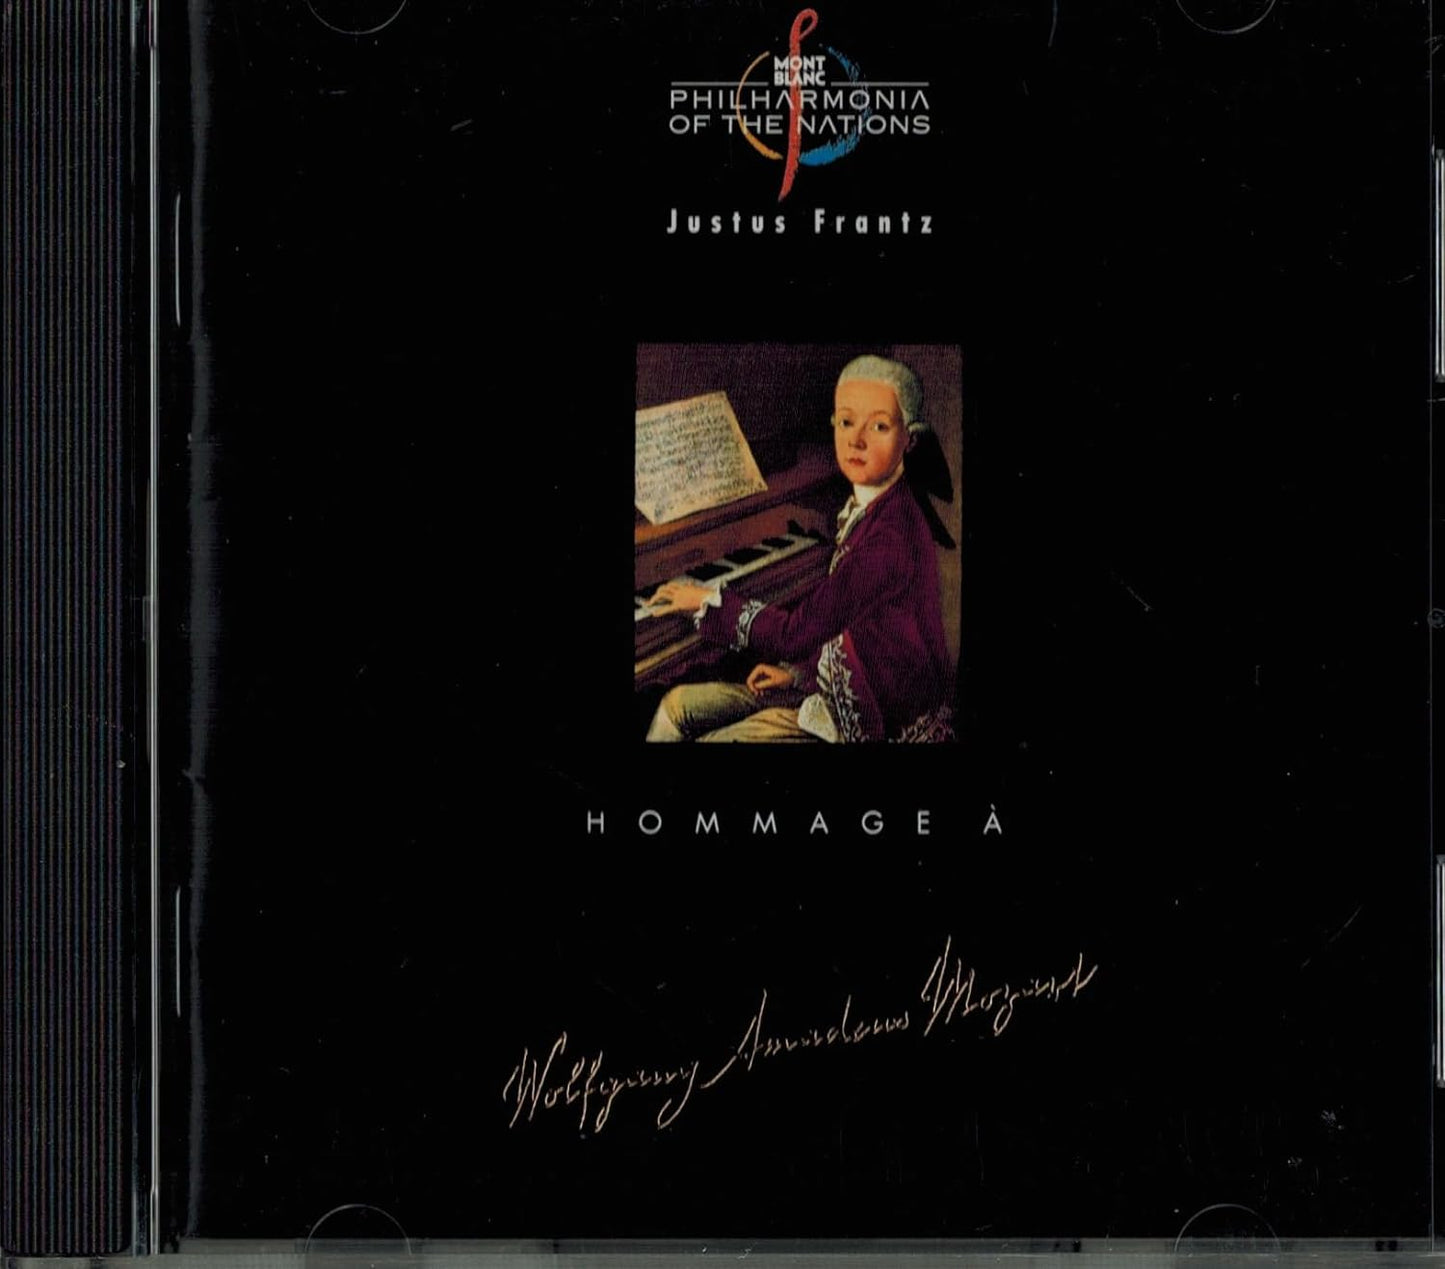 Hommage a Mozart - Philharmonia of the Nations [Audio CD]